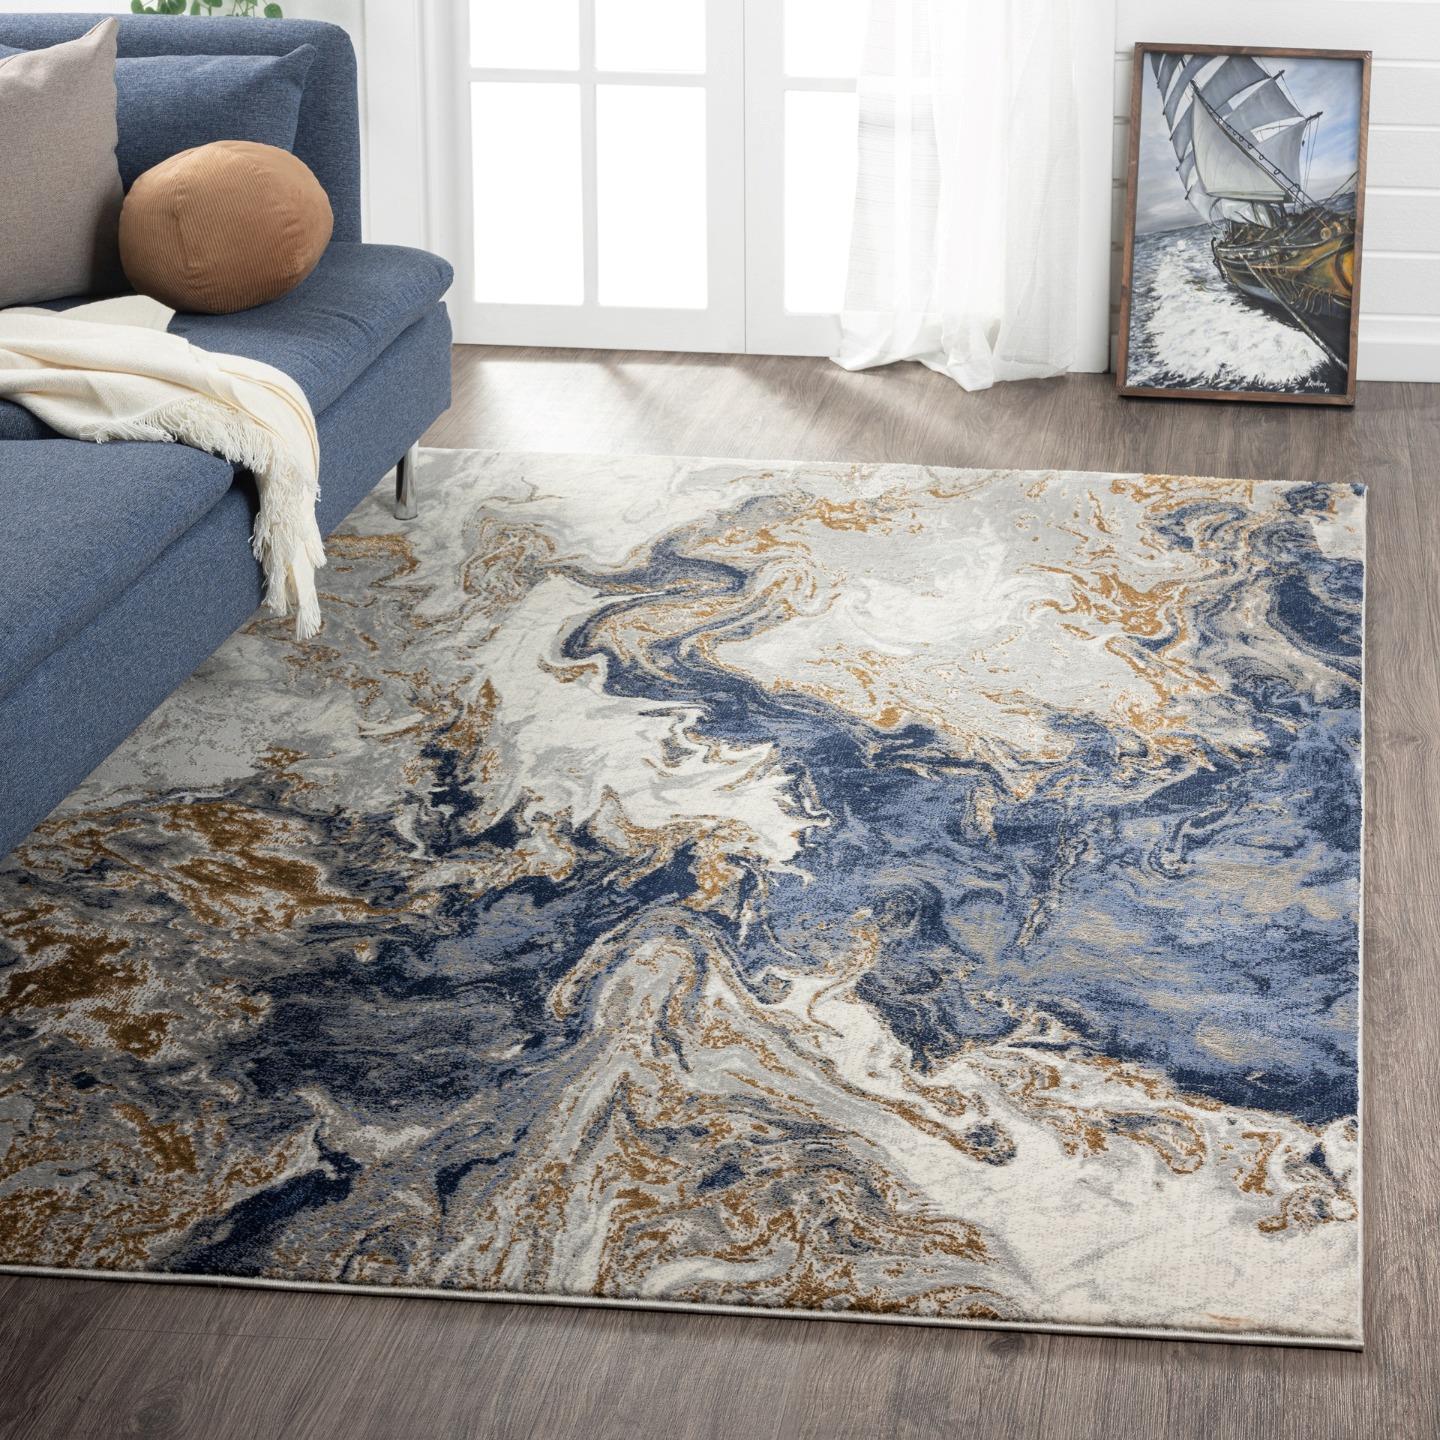 Luxe Weavers Marble Swirl Abstract Area Rug, Blue 5x7